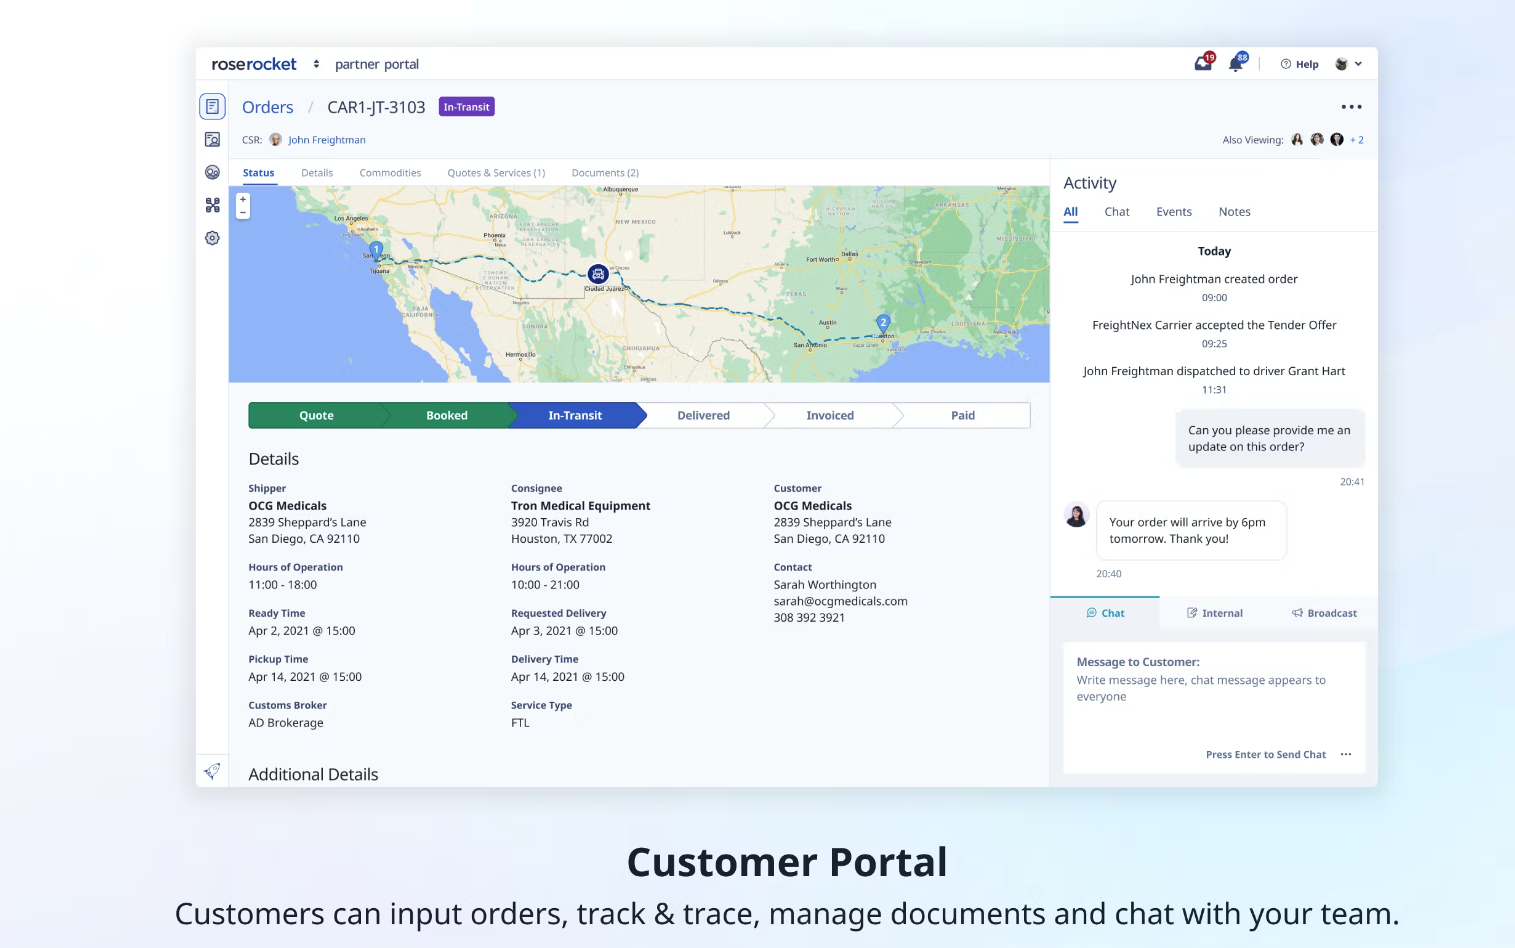 Rose Rocket allows users to track and trace orders, manage documents, and interact with the team